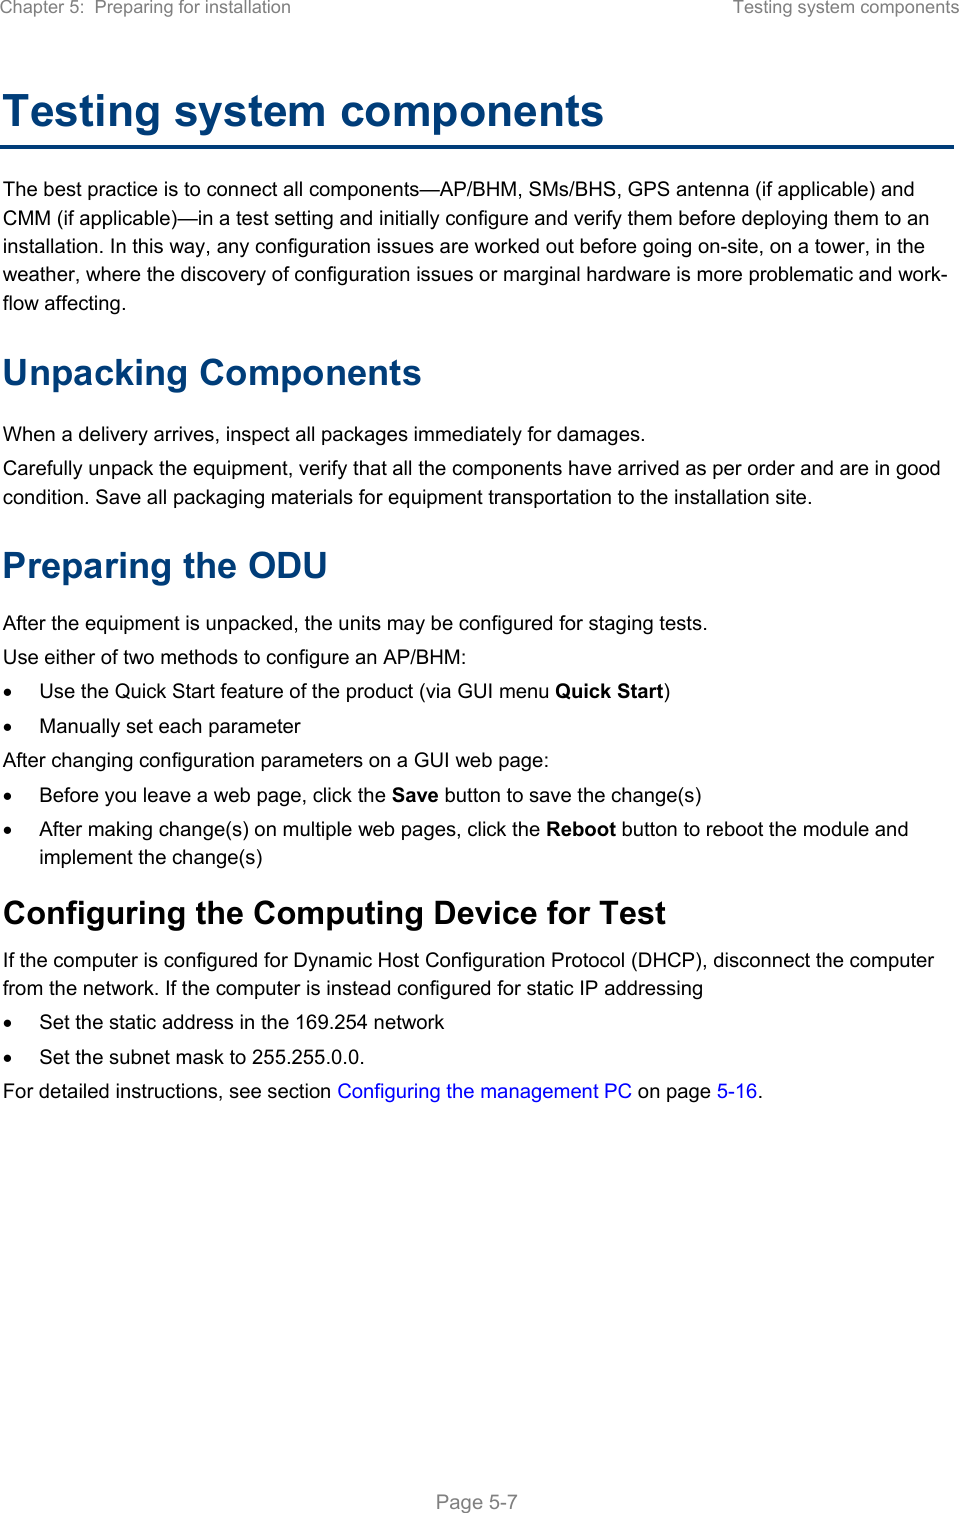 Chapter 5:  Preparing for installation  Testing system components   Page 5-7 Testing system components The best practice is to connect all components—AP/BHM, SMs/BHS, GPS antenna (if applicable) and CMM (if applicable)—in a test setting and initially configure and verify them before deploying them to an installation. In this way, any configuration issues are worked out before going on-site, on a tower, in the weather, where the discovery of configuration issues or marginal hardware is more problematic and work-flow affecting. Unpacking Components When a delivery arrives, inspect all packages immediately for damages.  Carefully unpack the equipment, verify that all the components have arrived as per order and are in good condition. Save all packaging materials for equipment transportation to the installation site.  Preparing the ODU After the equipment is unpacked, the units may be configured for staging tests. Use either of two methods to configure an AP/BHM:   Use the Quick Start feature of the product (via GUI menu Quick Start)   Manually set each parameter After changing configuration parameters on a GUI web page:   Before you leave a web page, click the Save button to save the change(s)   After making change(s) on multiple web pages, click the Reboot button to reboot the module and implement the change(s) Configuring the Computing Device for Test If the computer is configured for Dynamic Host Configuration Protocol (DHCP), disconnect the computer from the network. If the computer is instead configured for static IP addressing   Set the static address in the 169.254 network    Set the subnet mask to 255.255.0.0. For detailed instructions, see section Configuring the management PC on page 5-16.   